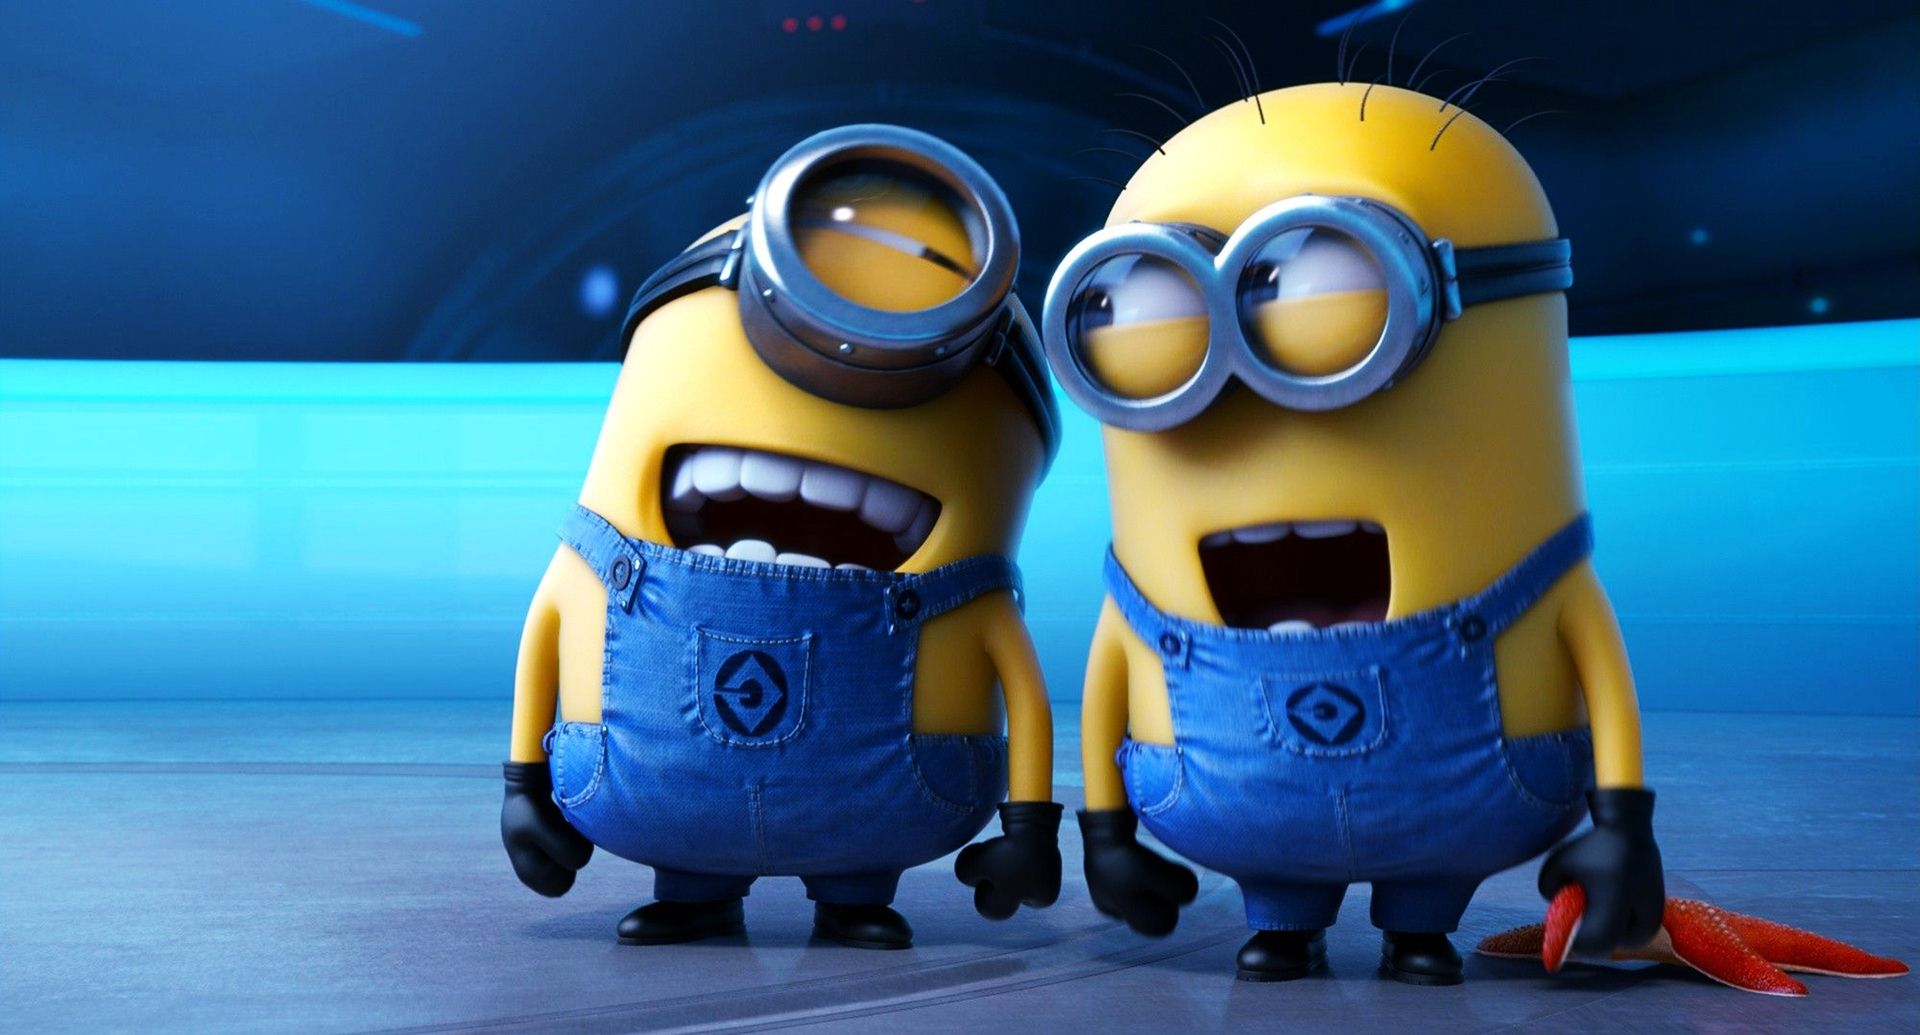 wallpapers de los minions,blue,yellow,animation,toy,animated cartoon